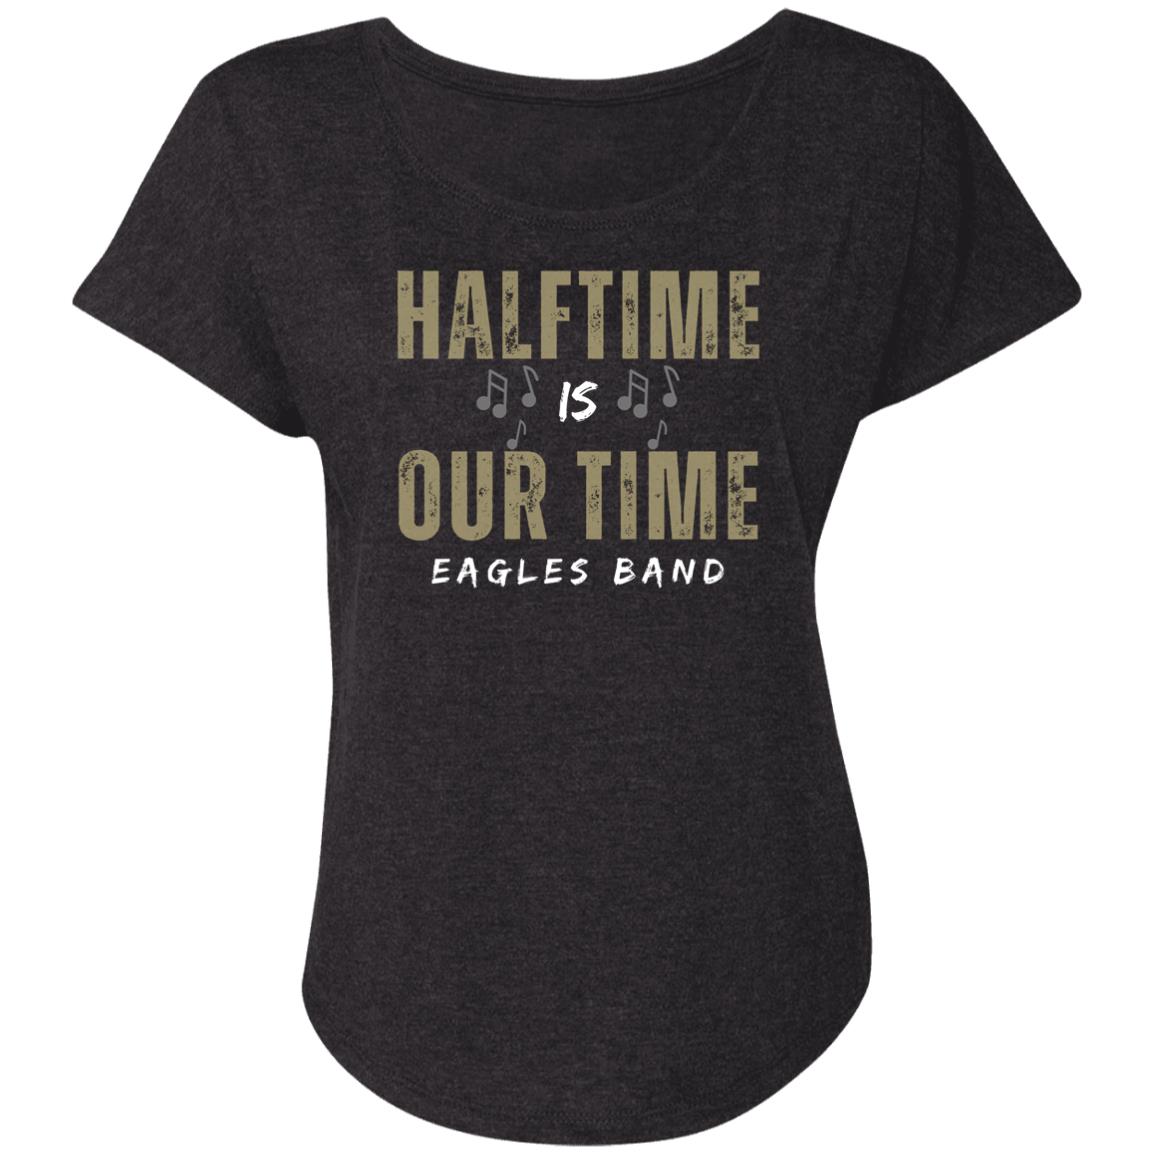 Women's Super Soft Our Time Band Dolman Graphic Tee - New Albany Eagles